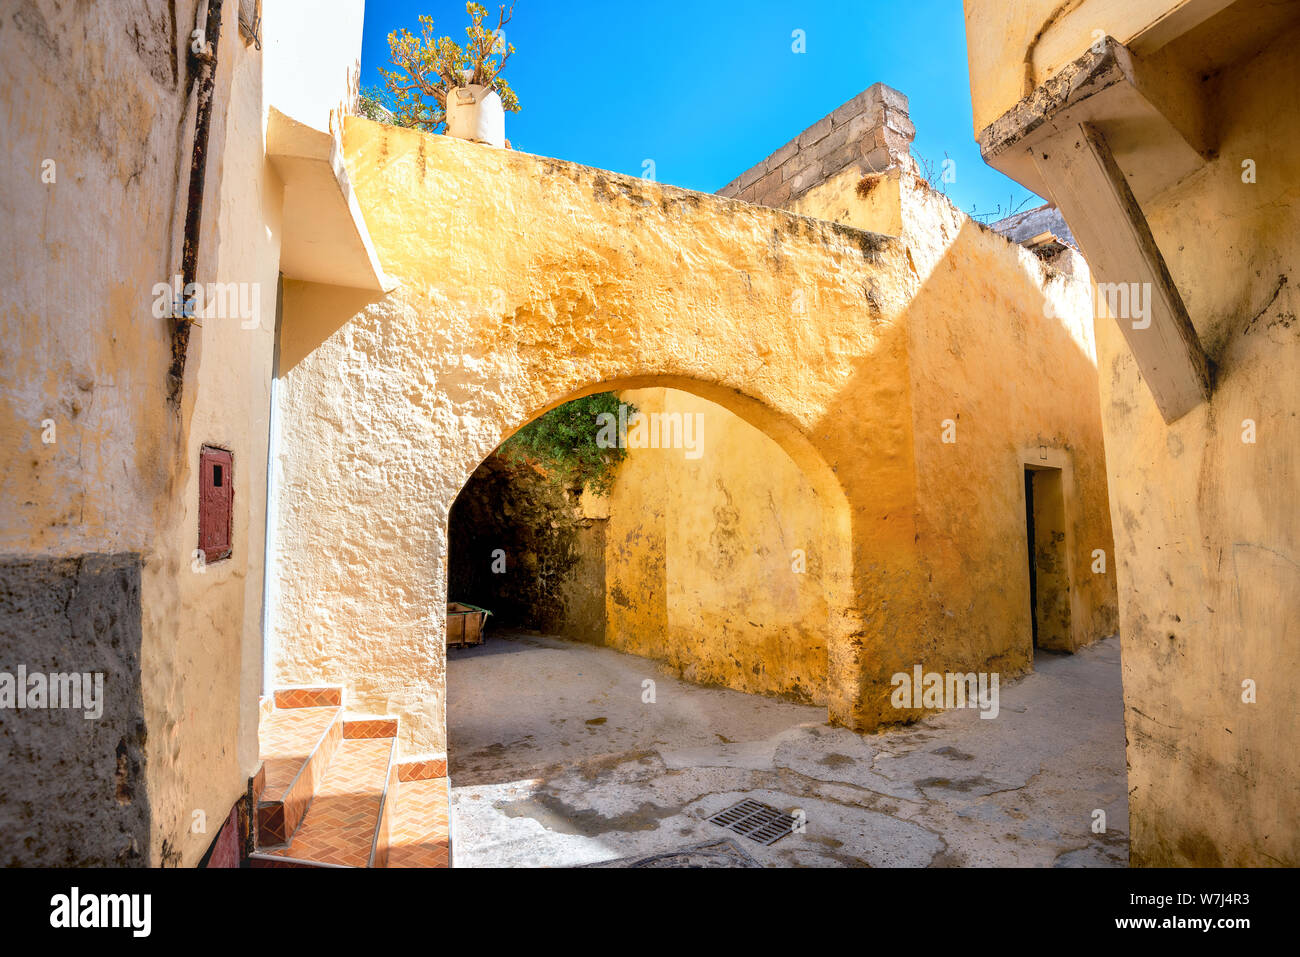 Typical alley with facade of residential houses in medina Essaouira. Morocco, North Africa Stock Photo